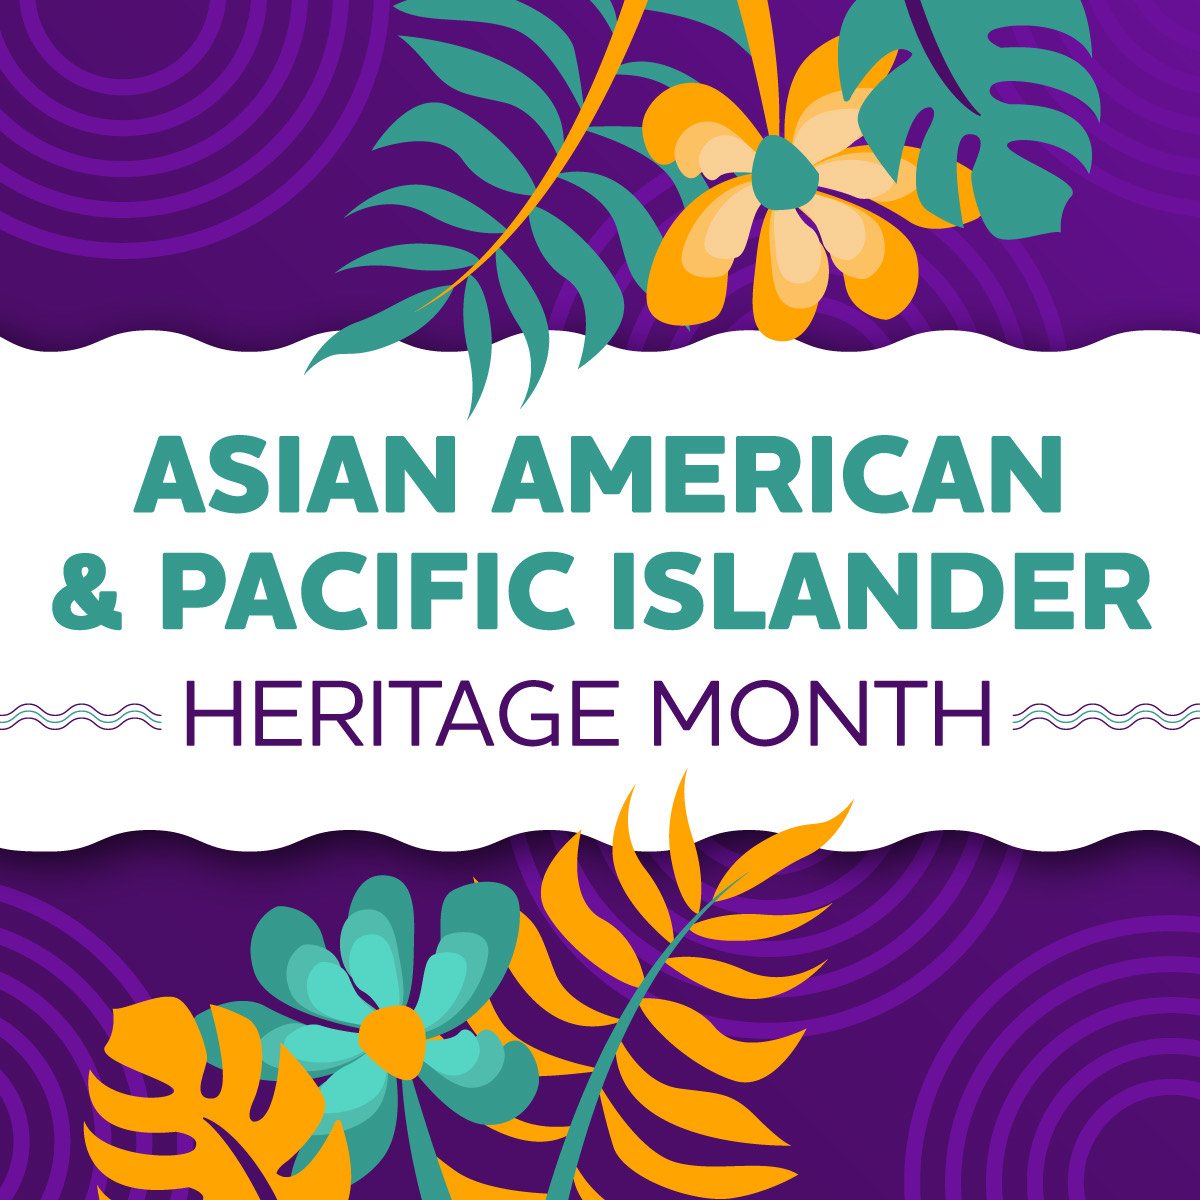 Asian Americans and Pacific Islanders have shaped the history of the U.S. through great strength and perseverance. This #AAPIMonth, and throughout the year, we celebrate those in the community who are committed to the fight to #ENDALZ.